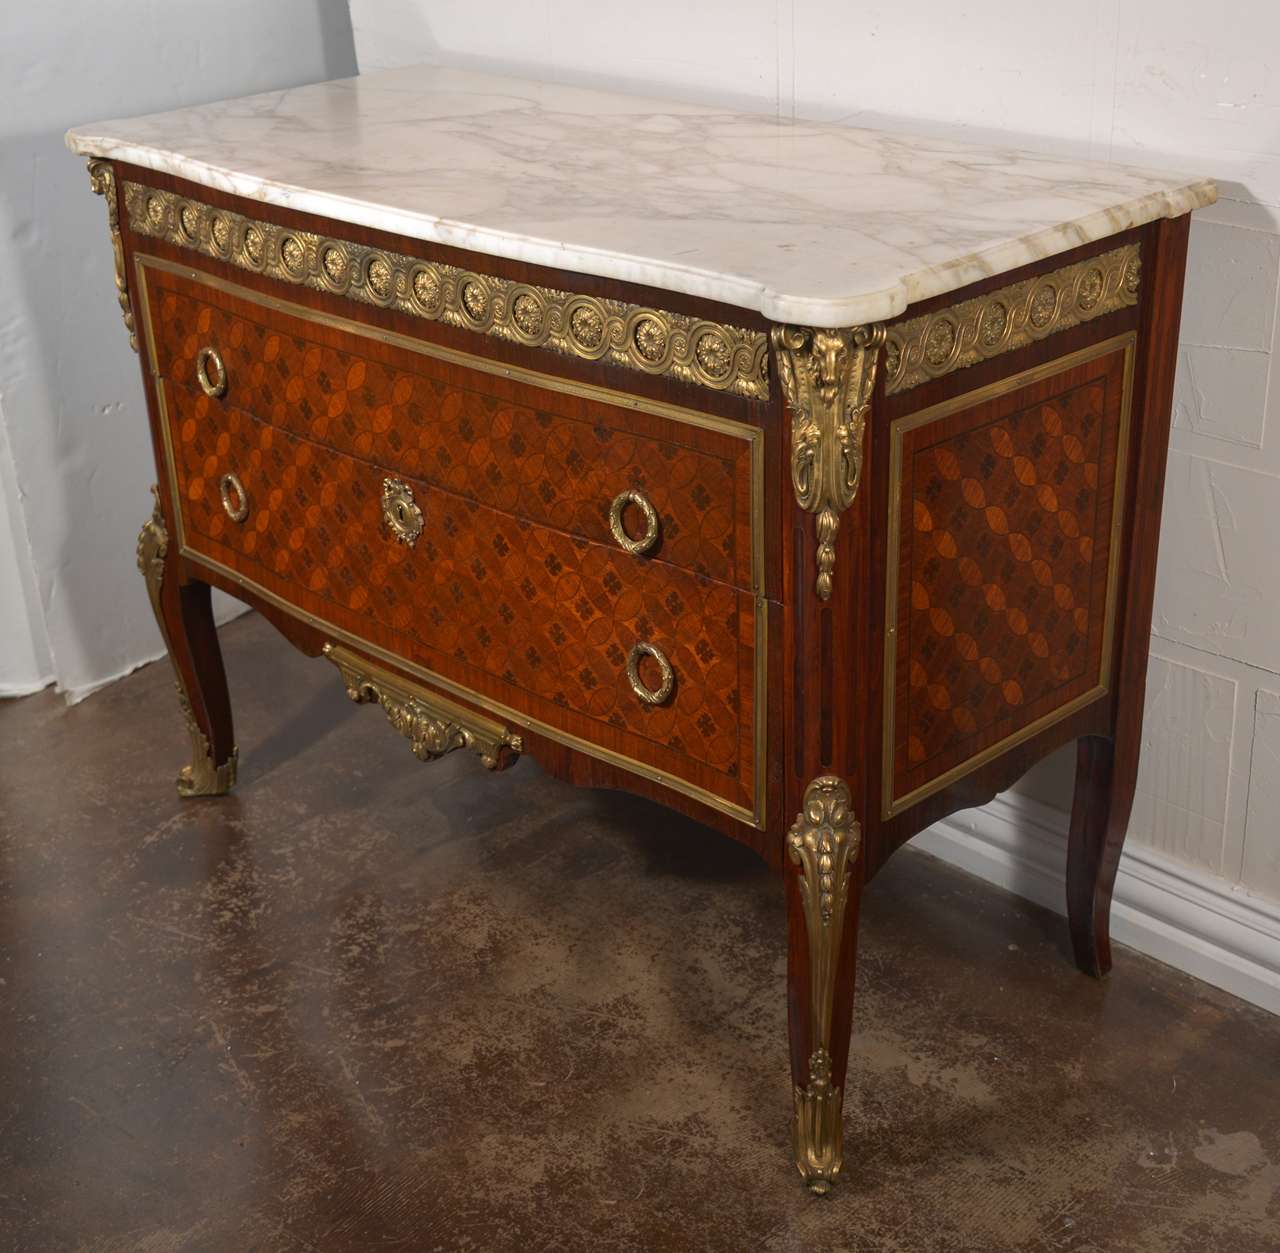 Beautiful first quality 19th c Louis XVI mahogany and kingwood marble topped commode. The commode has beautiful gilt bronze mounts with rams head details